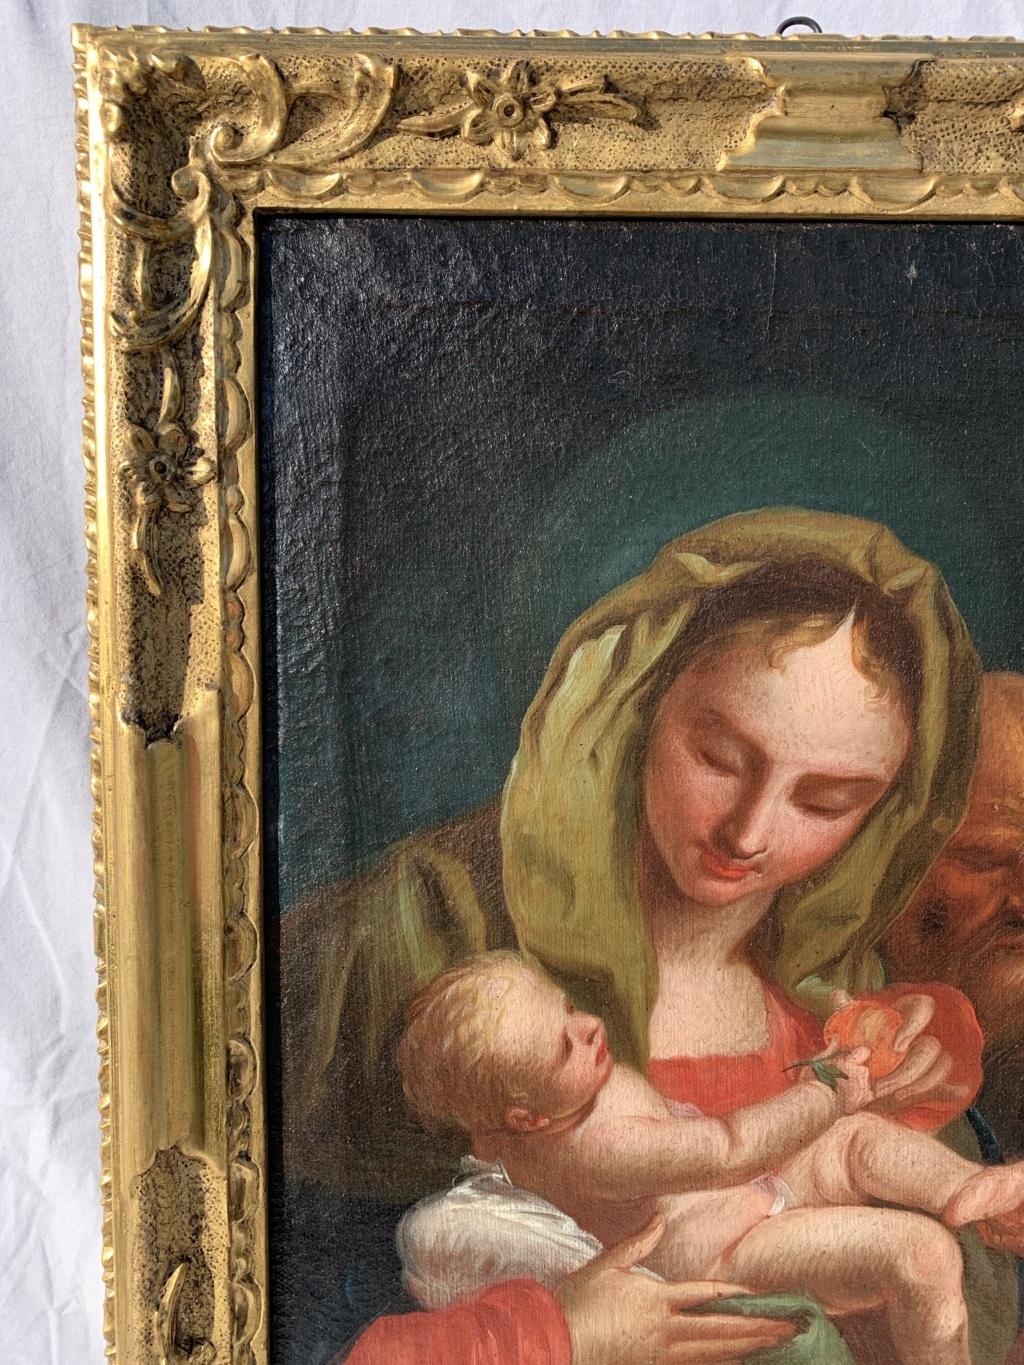 18th century Venetian figure painting - Virgin Child - Oil Canvas Tiepolo Venice - Rococo Painting by Unknown